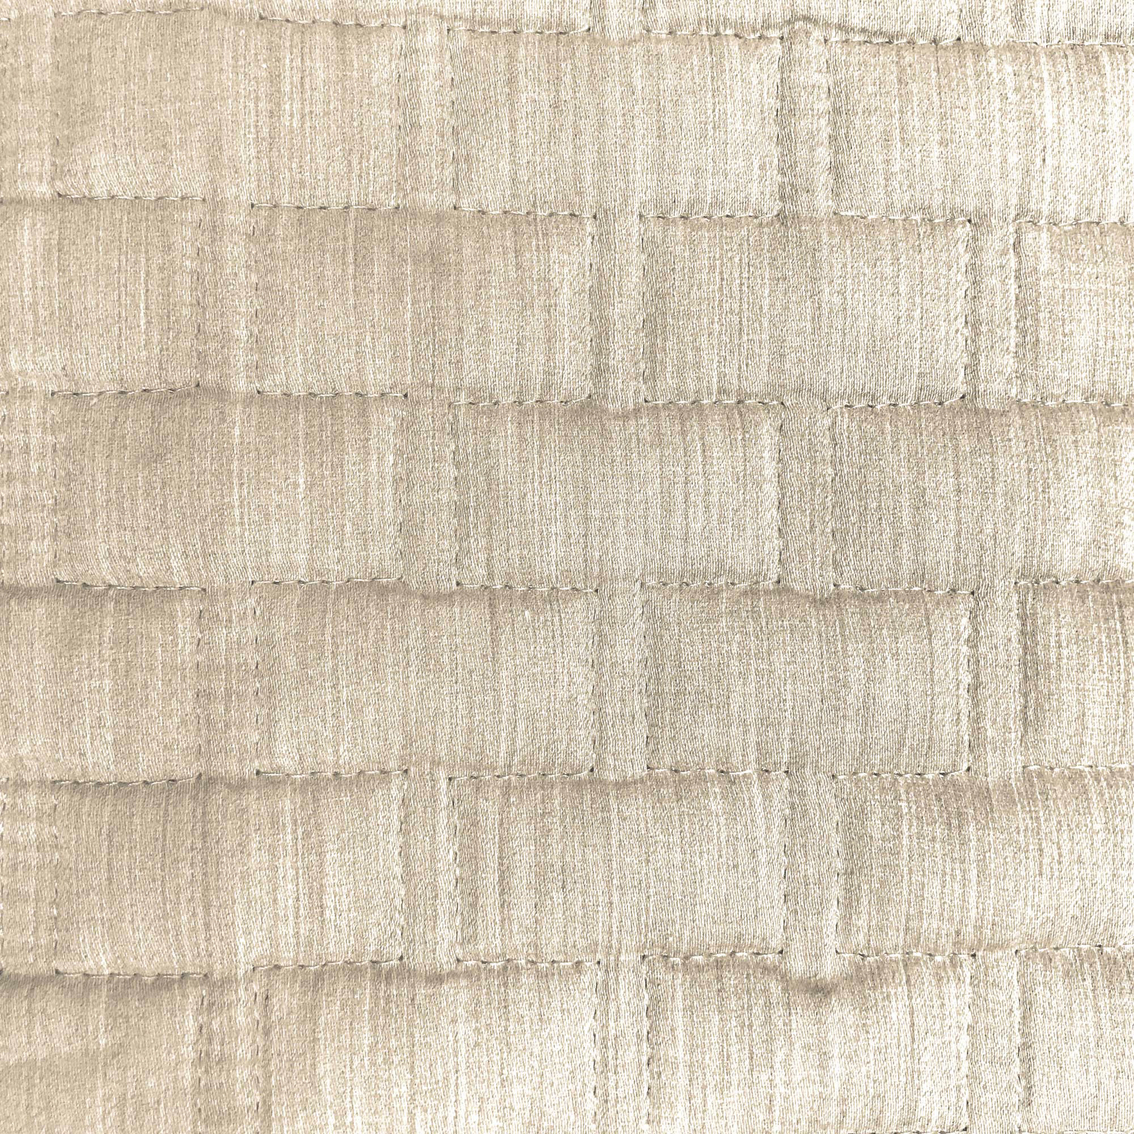 BedVoyage Melange Viscose from Bamboo Cotton Quilted Decorative Pillow - Image 6 of 6